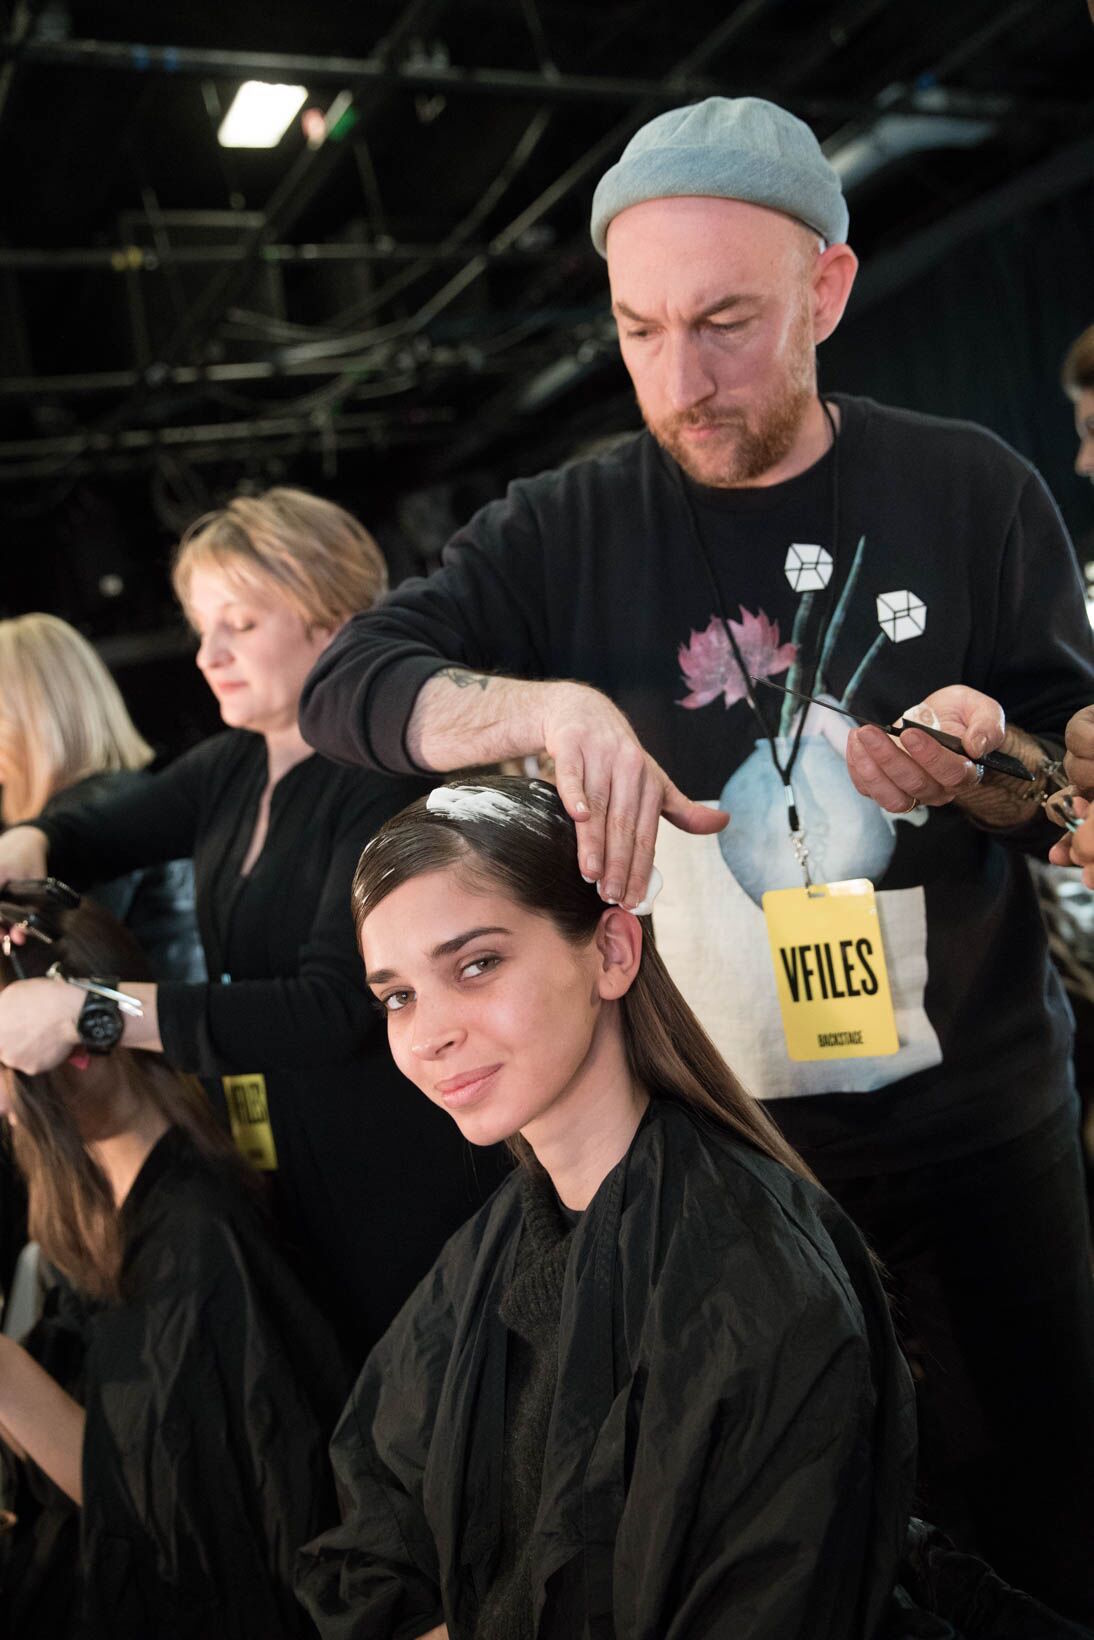 Michael Forrey does a model's hair during fashion week